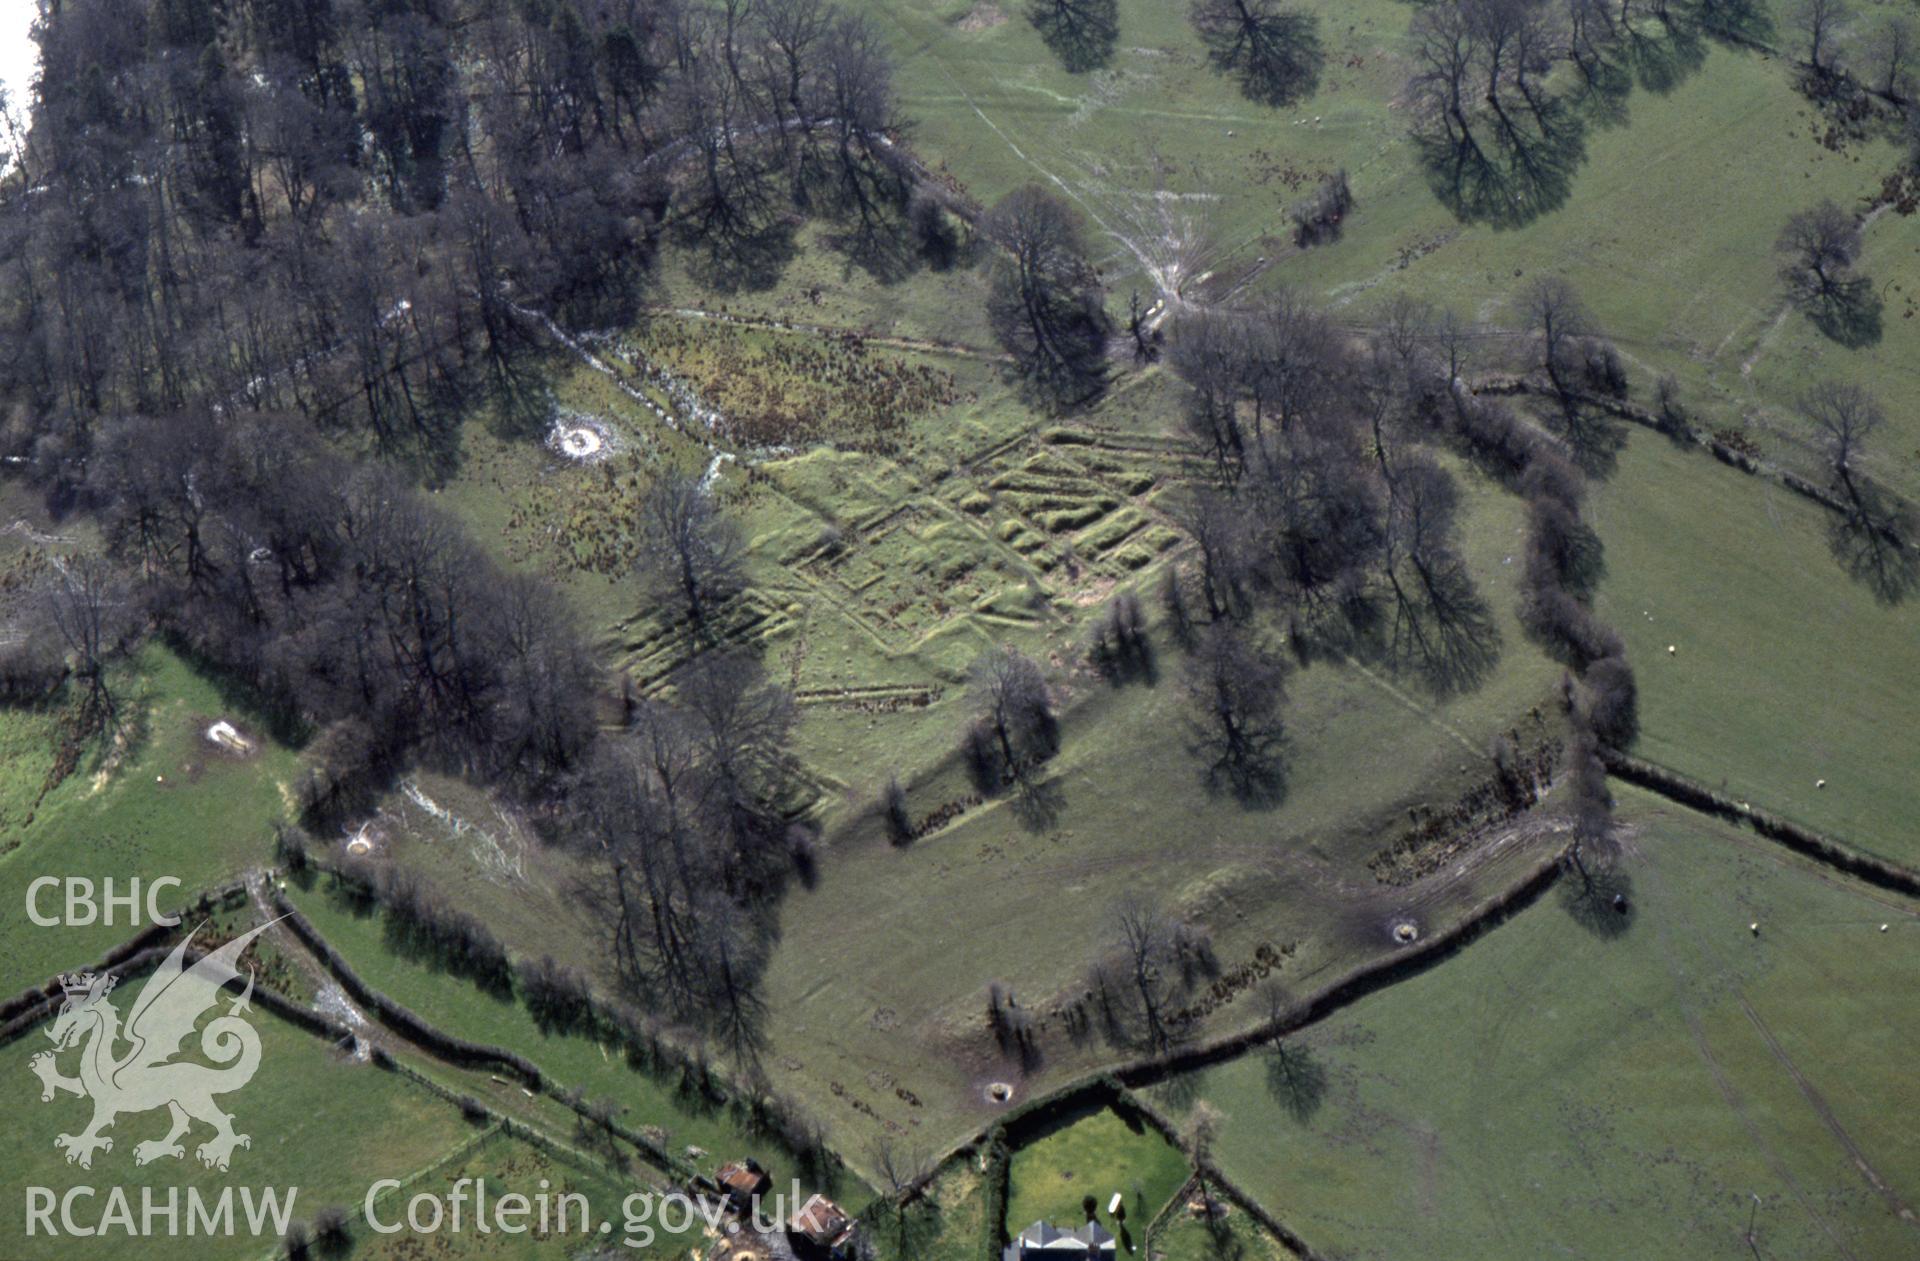 RCAHMW colour slide oblique aerial photograph of Castell Collen Roman Fort, Llanyre, taken by C.R. Musson, 26/03/94